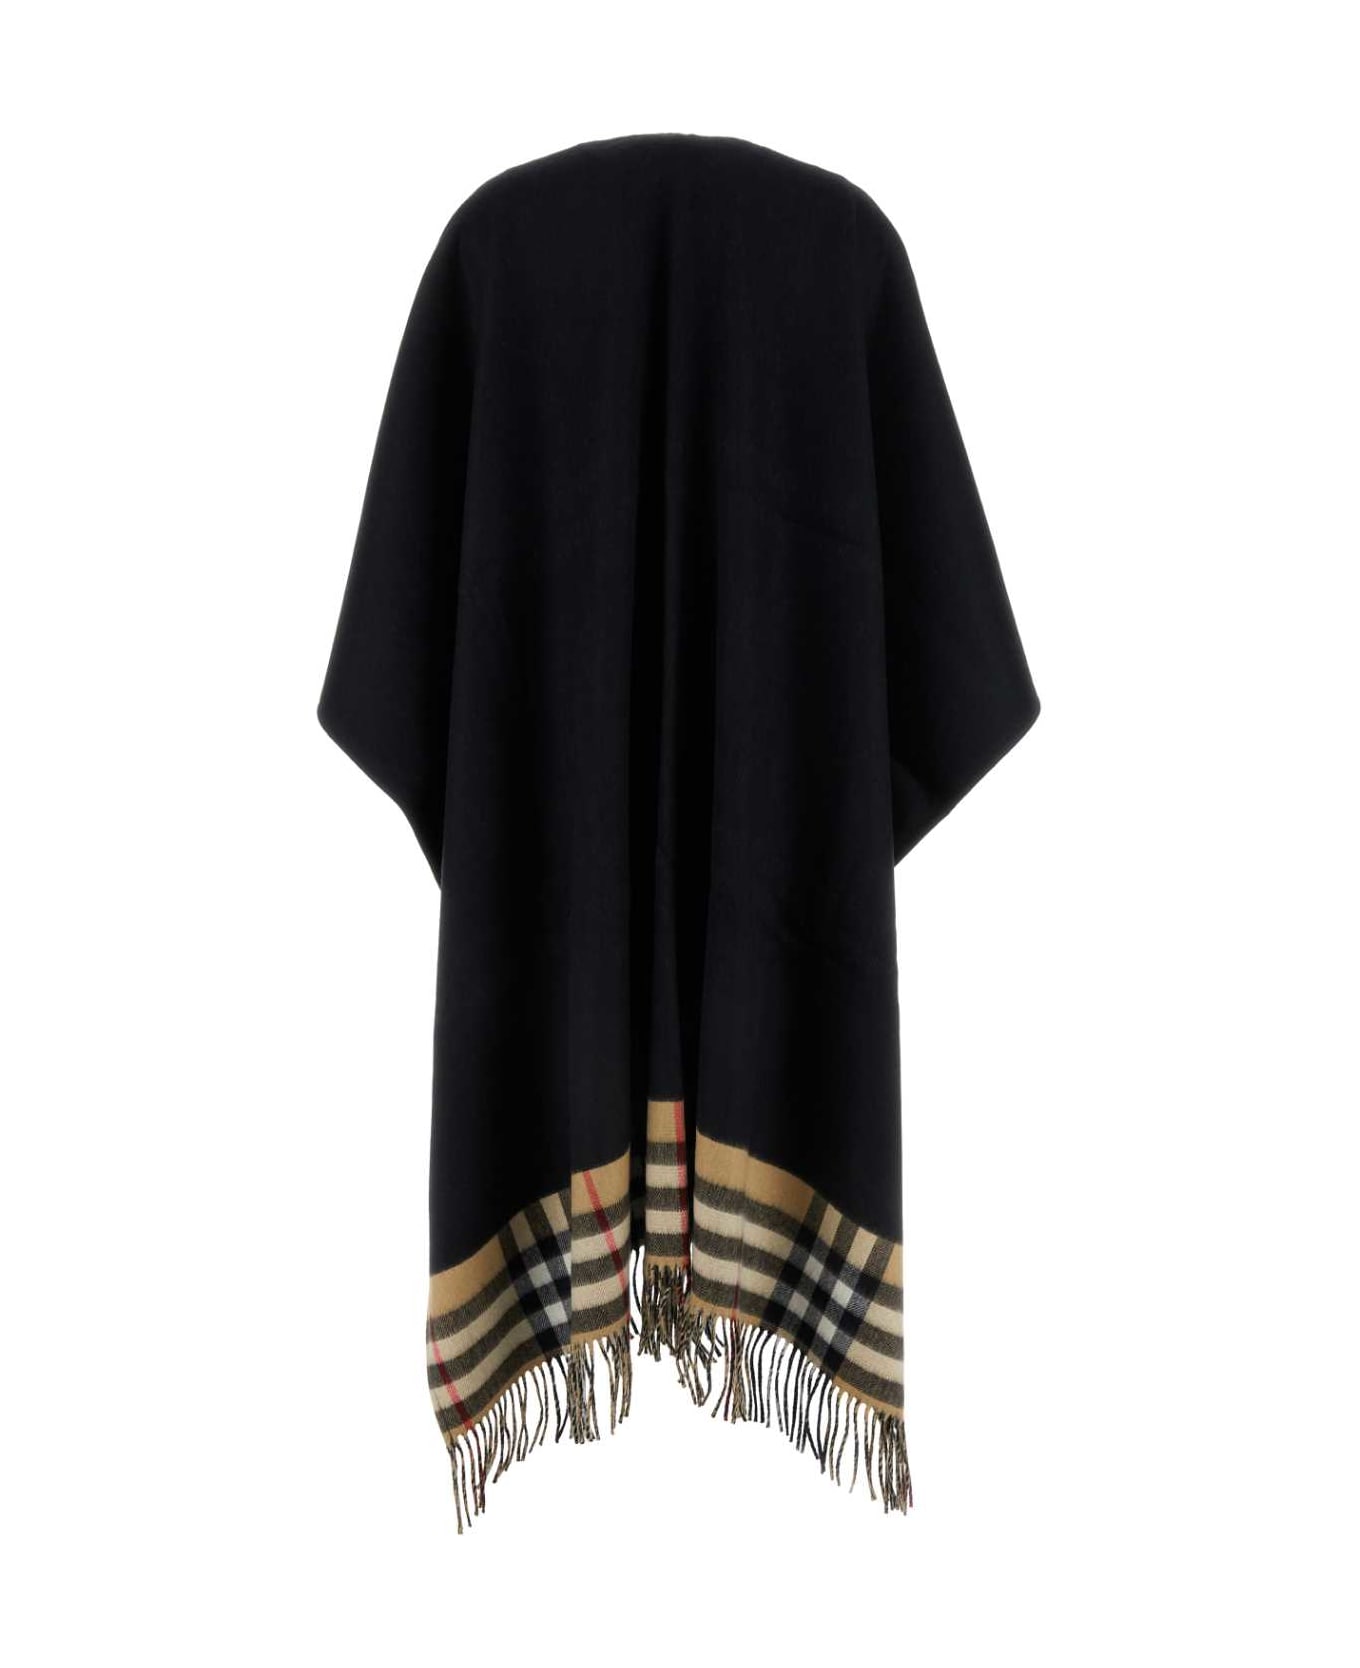 Burberry Black Cashmere And Wool Cape - BLACK